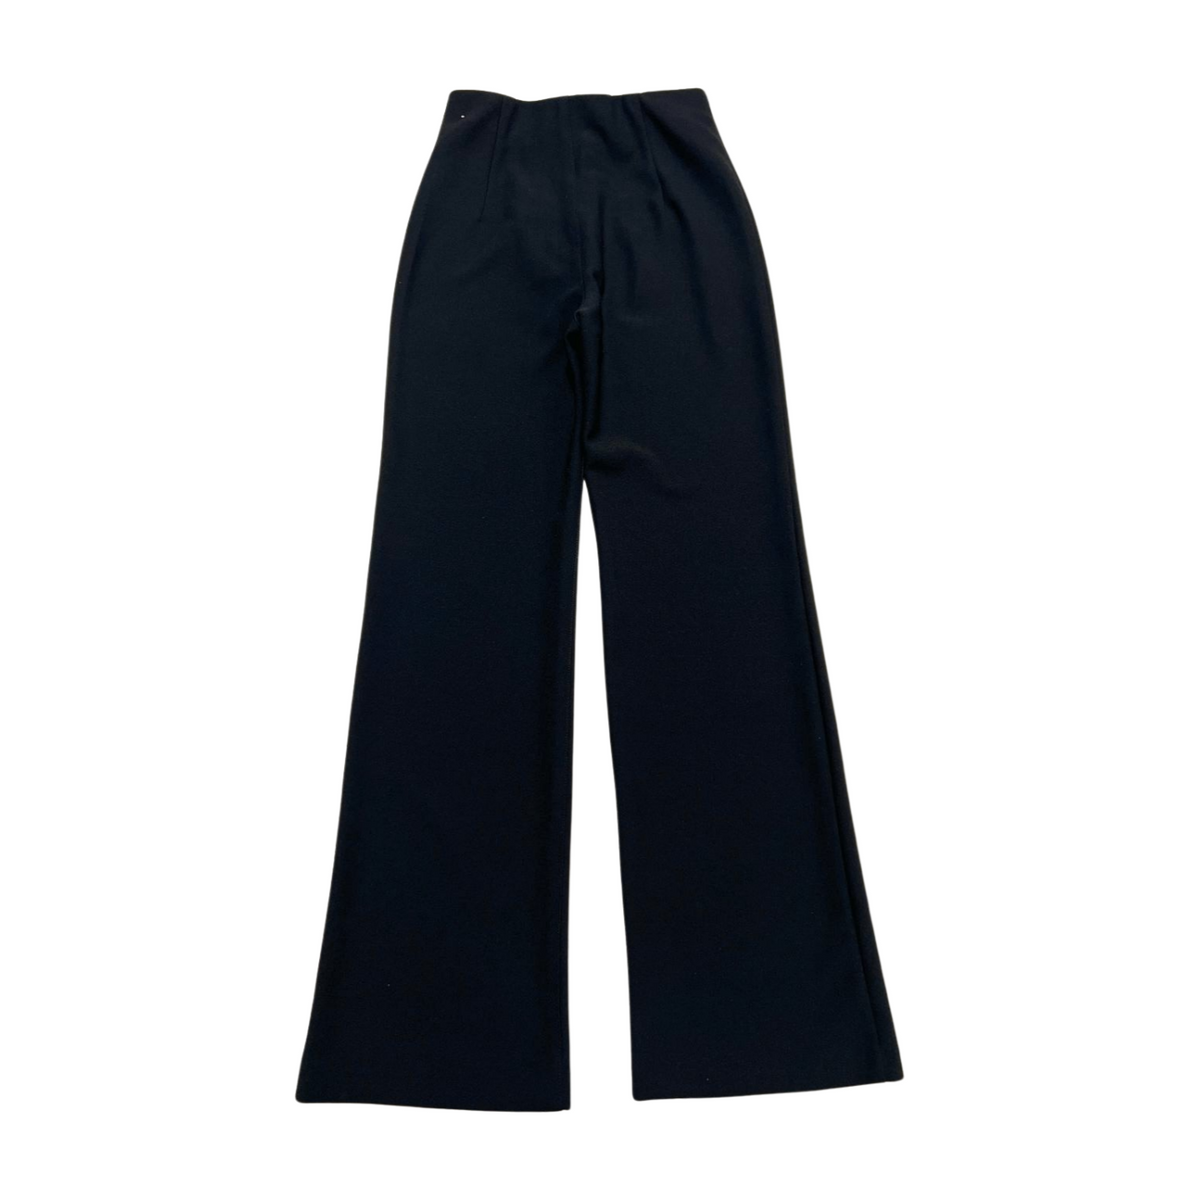 Abercrombie & Fitch- Black Trousers